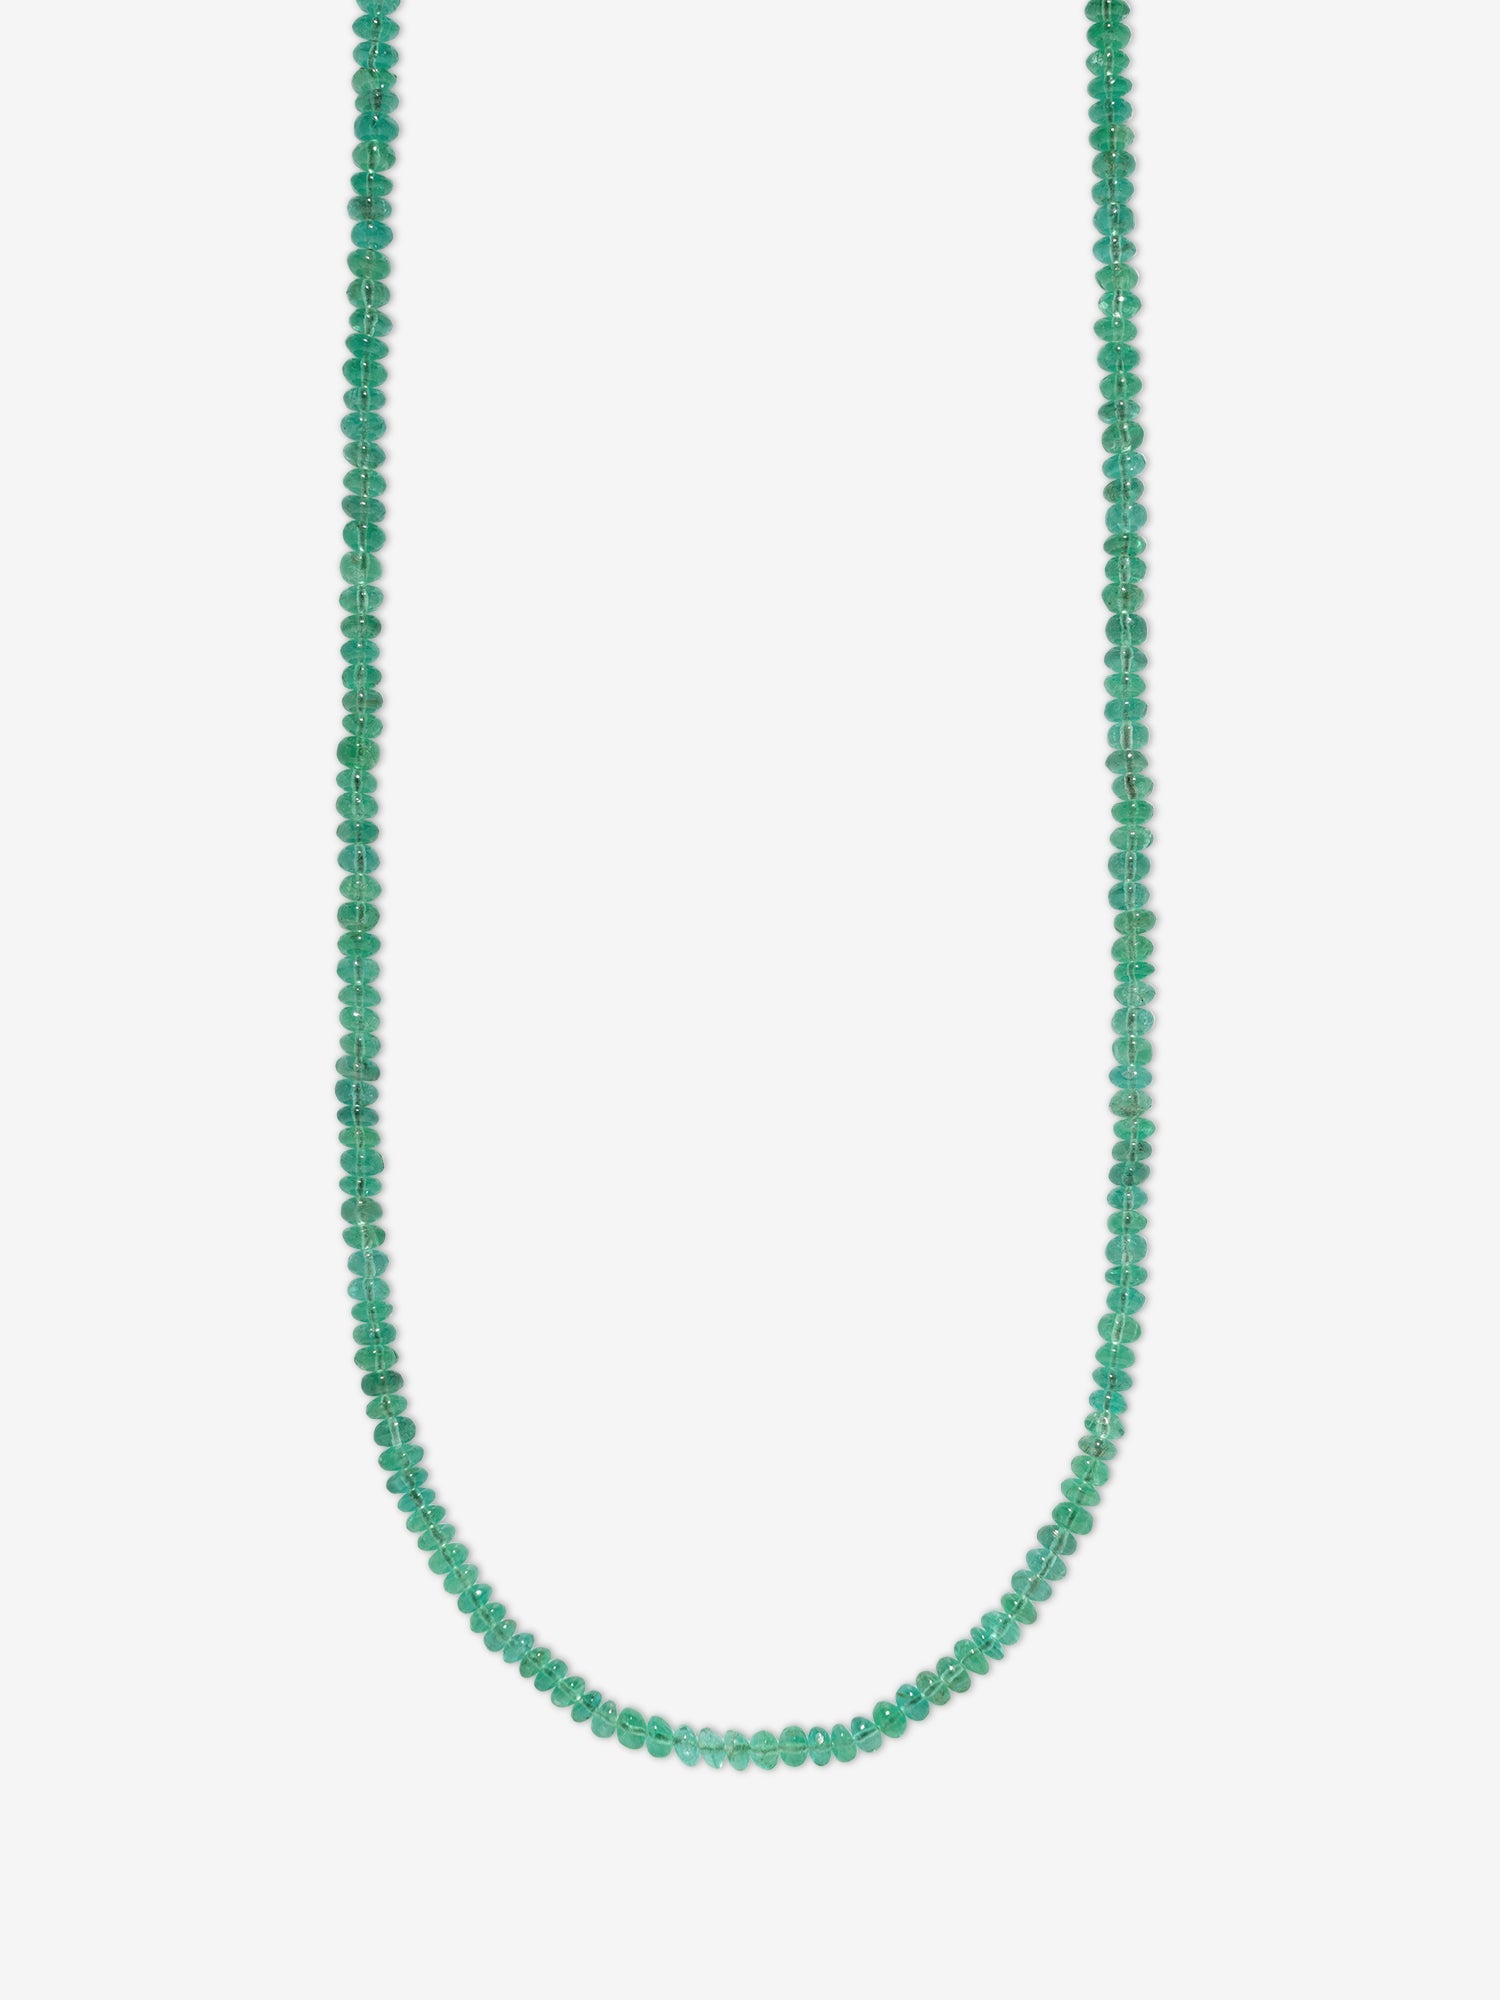 Small Light Green Emerald Bead Necklace